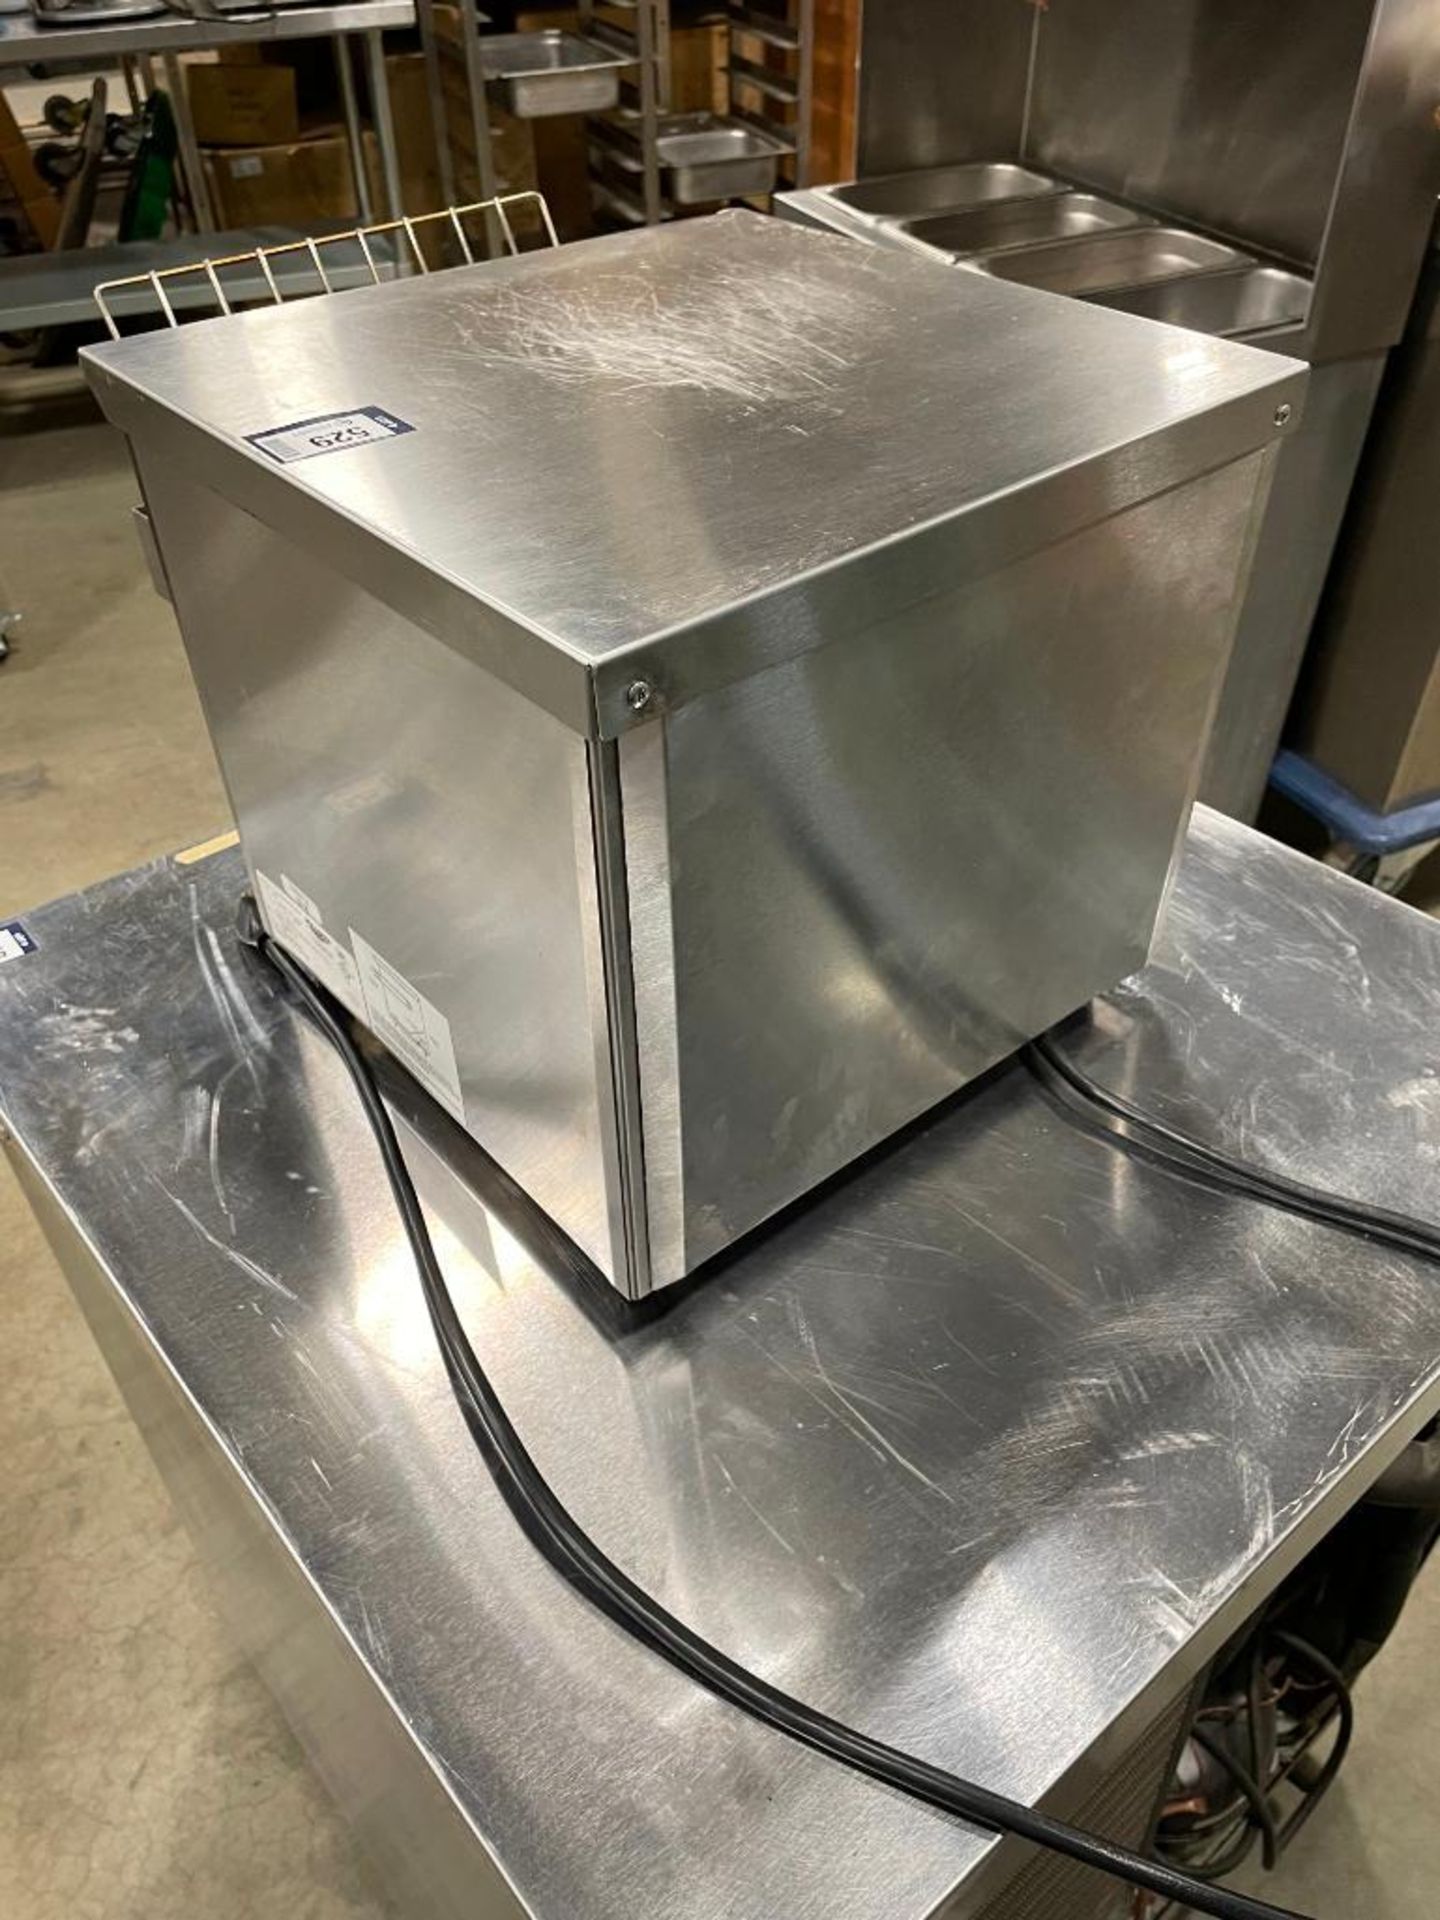 VOLLRATH JT1 - COMMERCIAL CONVEYOR TOASTER - Image 5 of 7